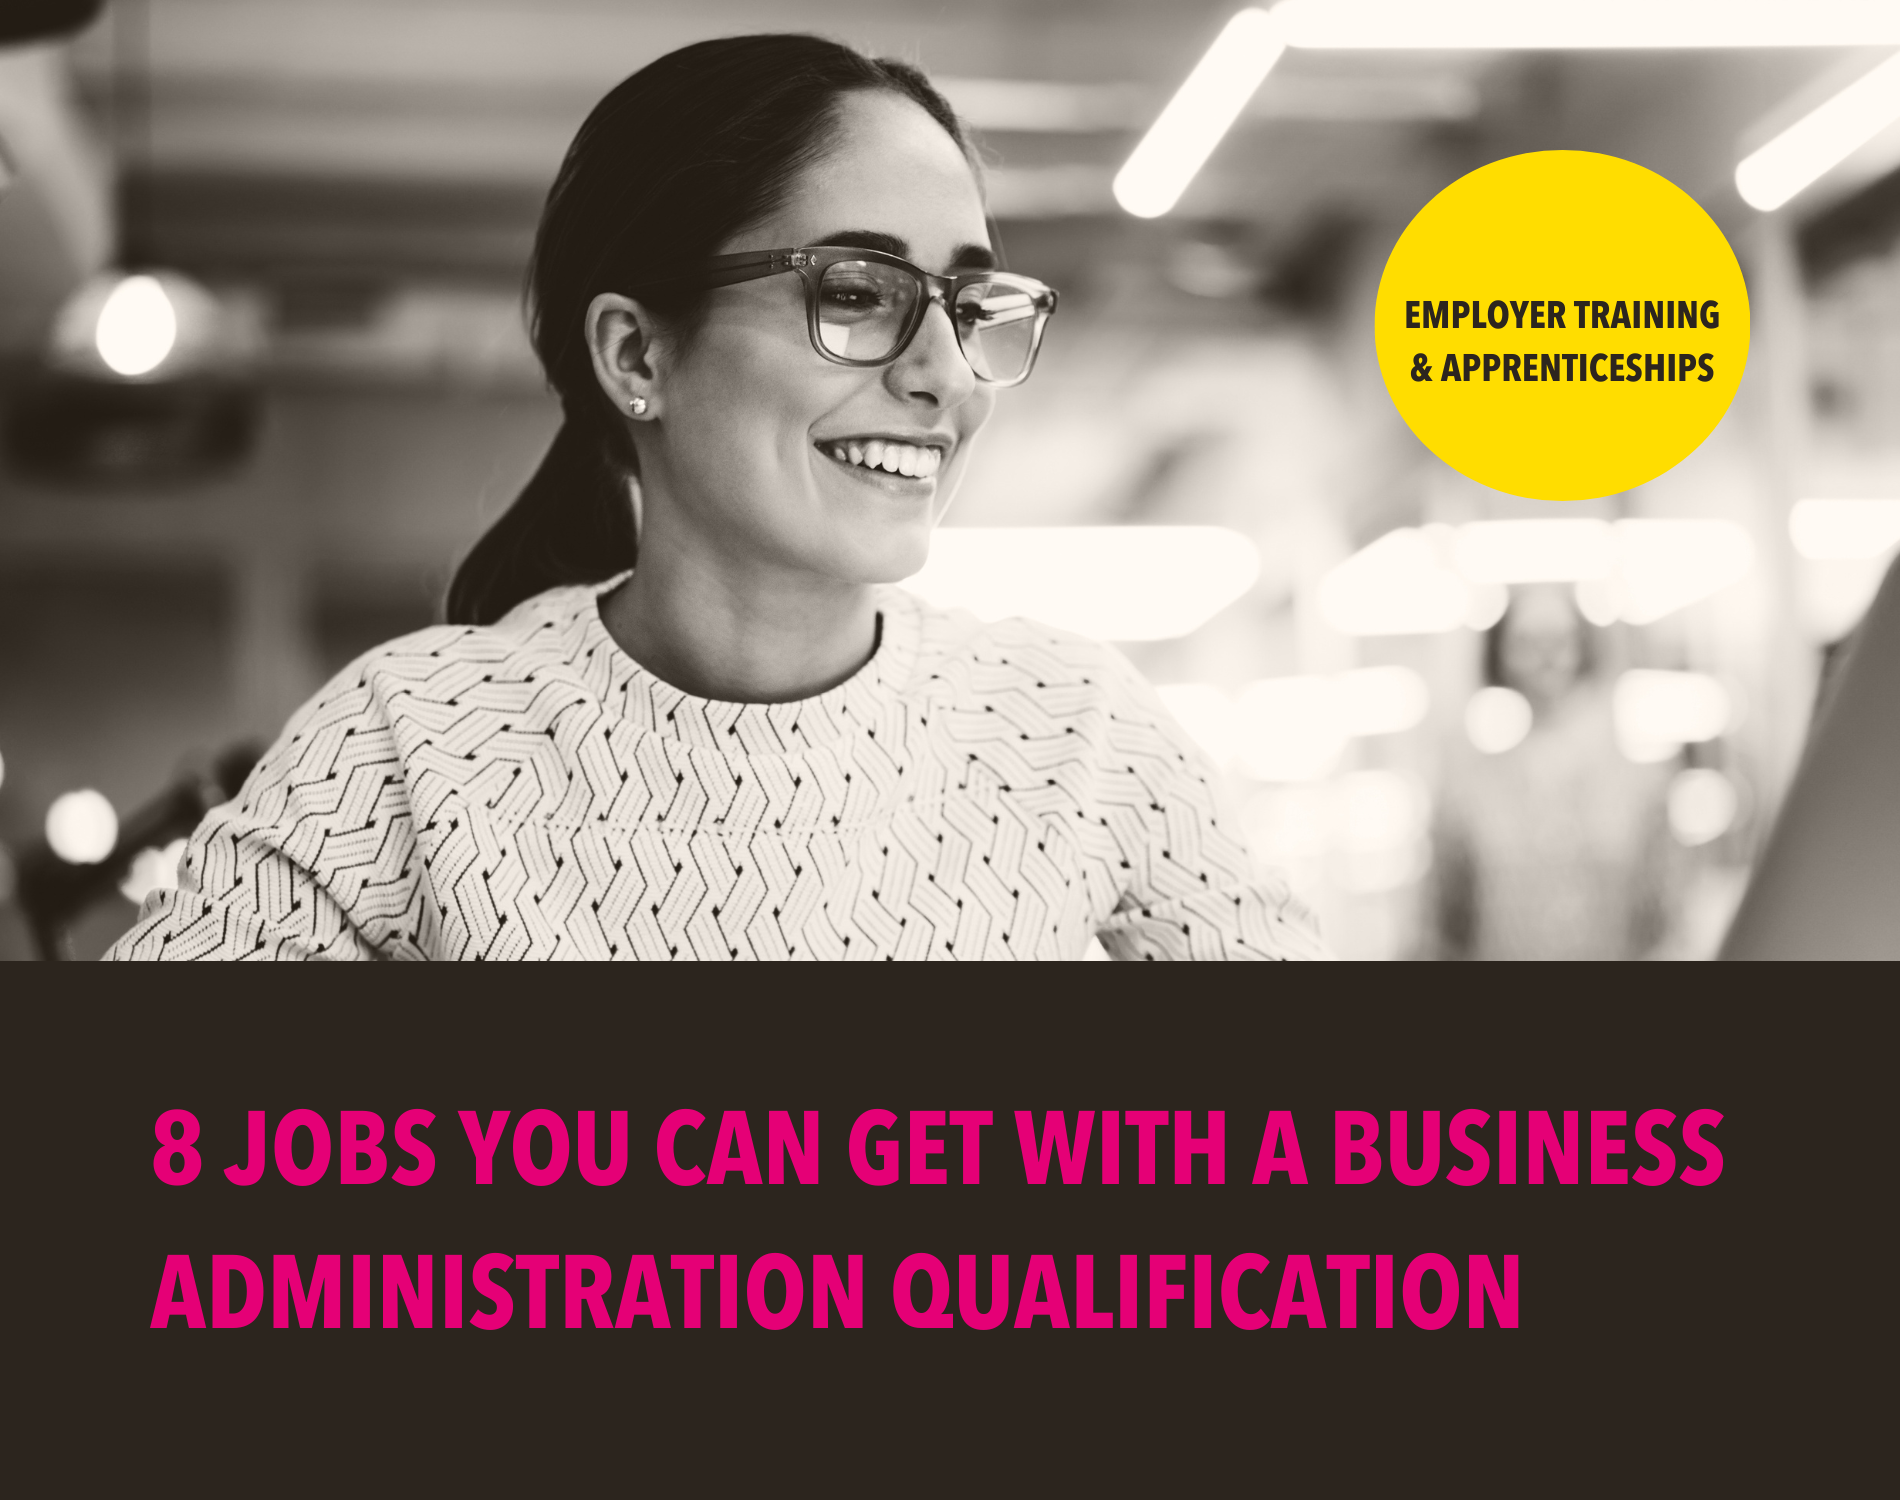 8 Jobs You Can Get with a Business Administration Qualification